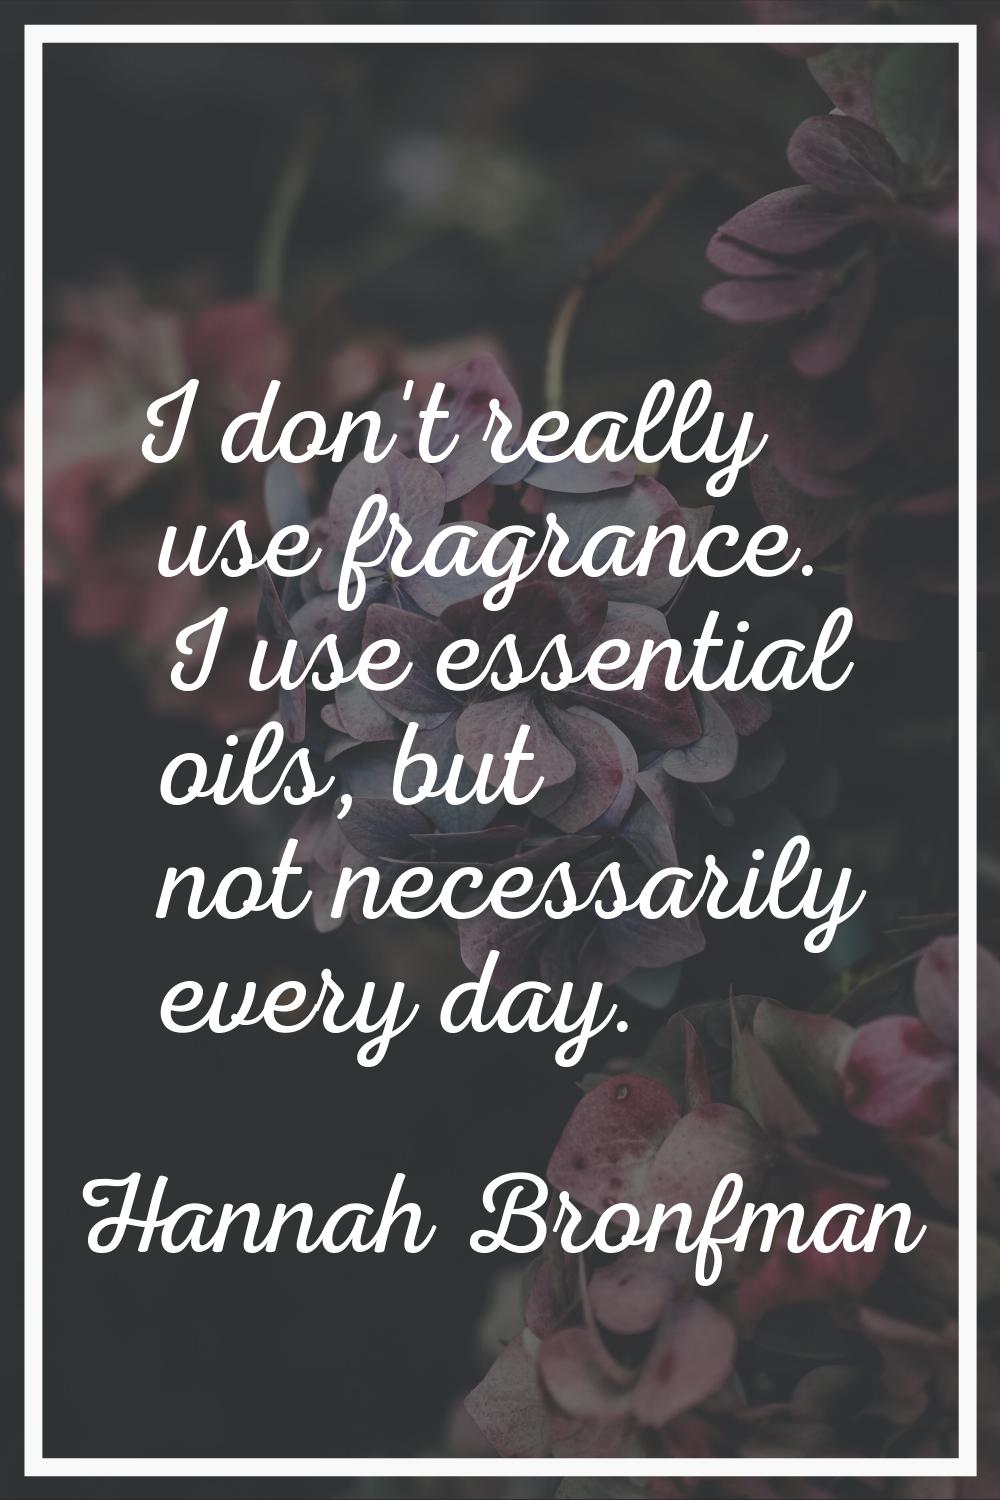 I don't really use fragrance. I use essential oils, but not necessarily every day.